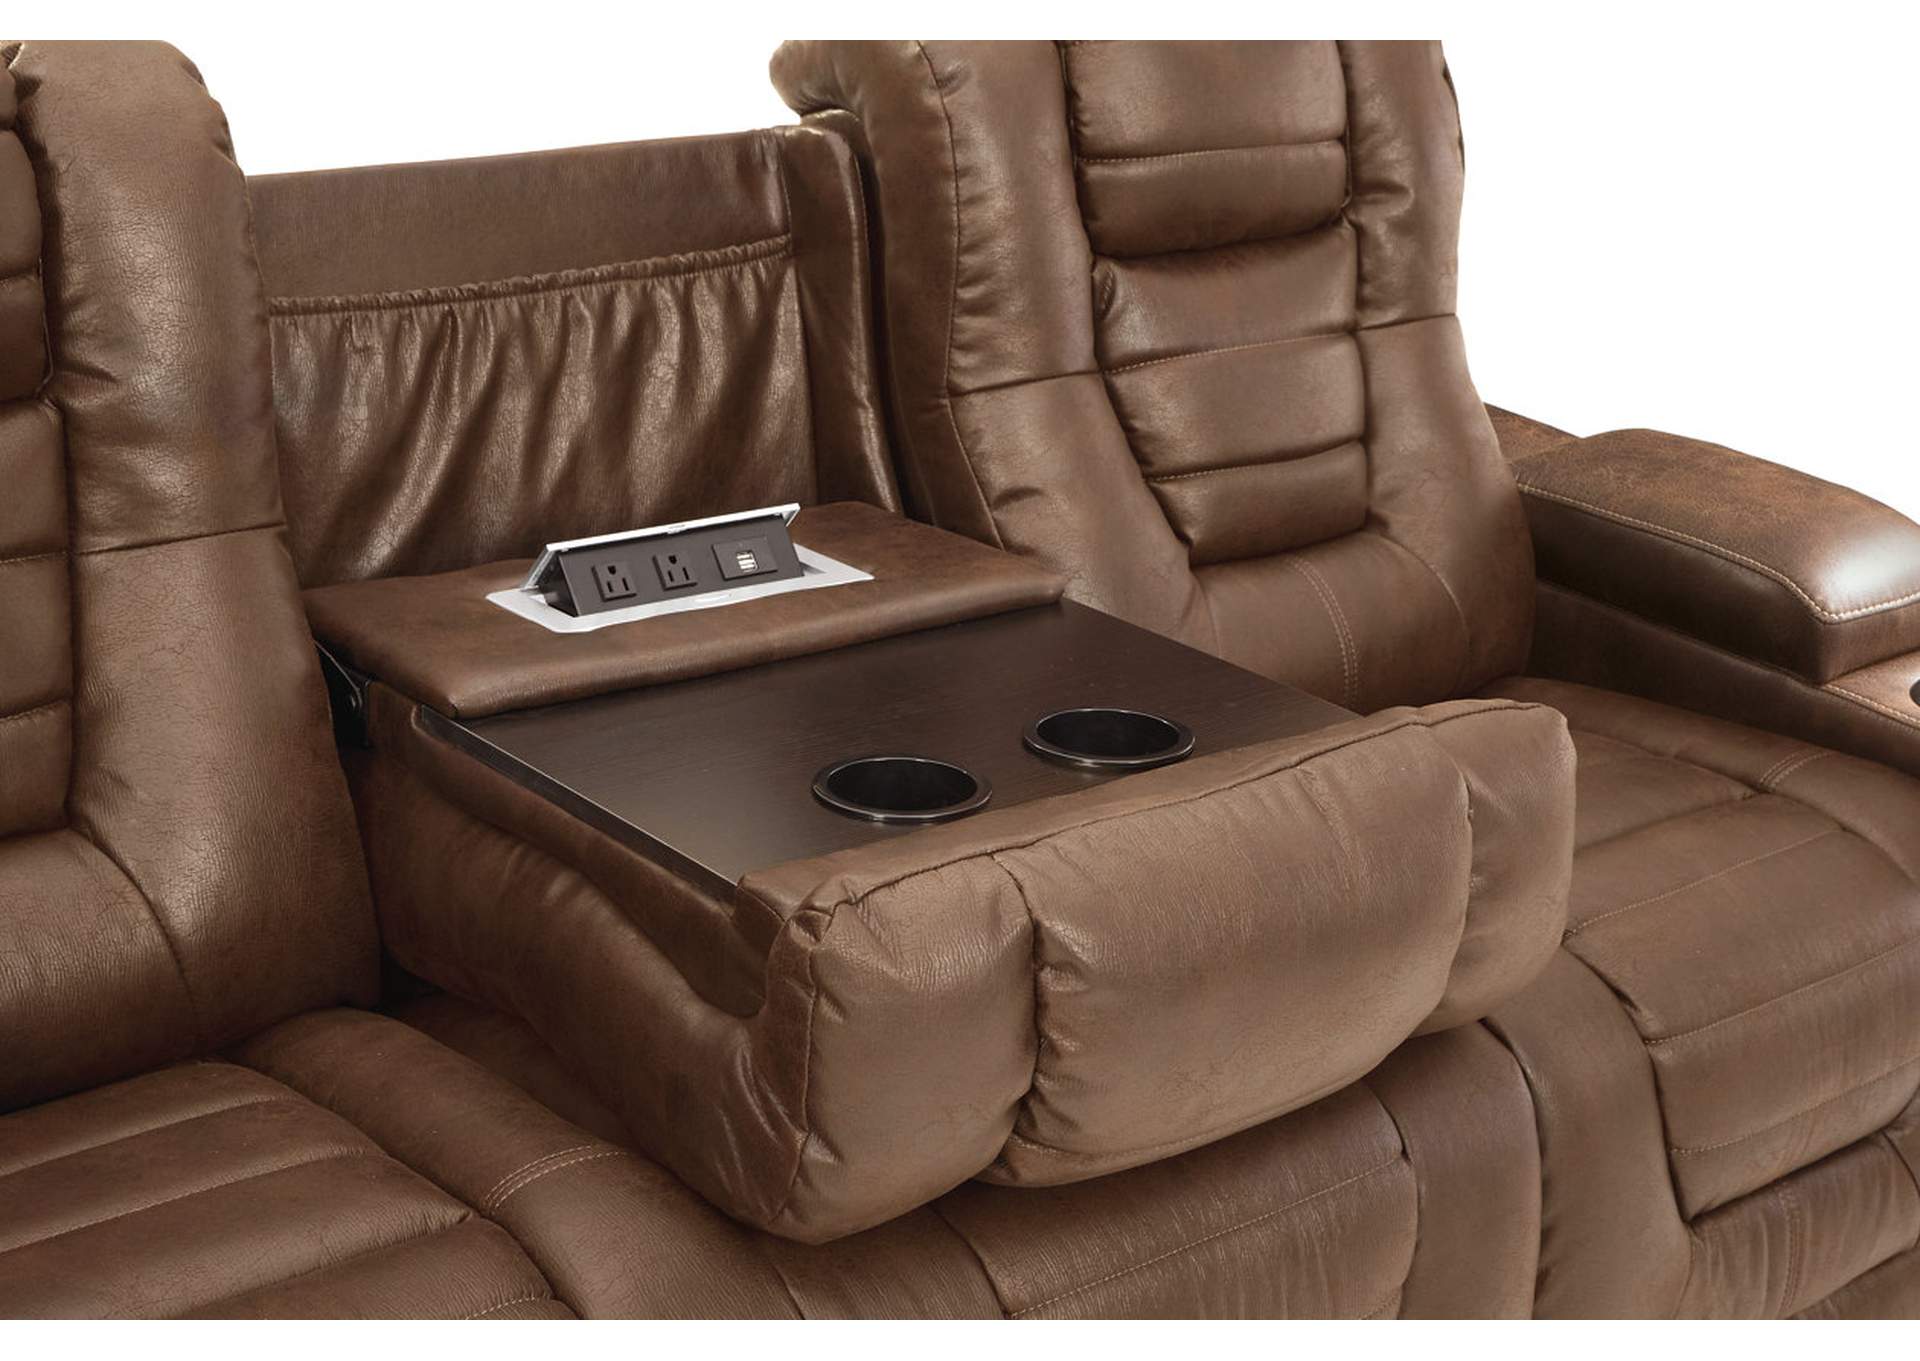 Owner's Box Power Reclining Sofa, Loveseat and Recliner,Signature Design By Ashley